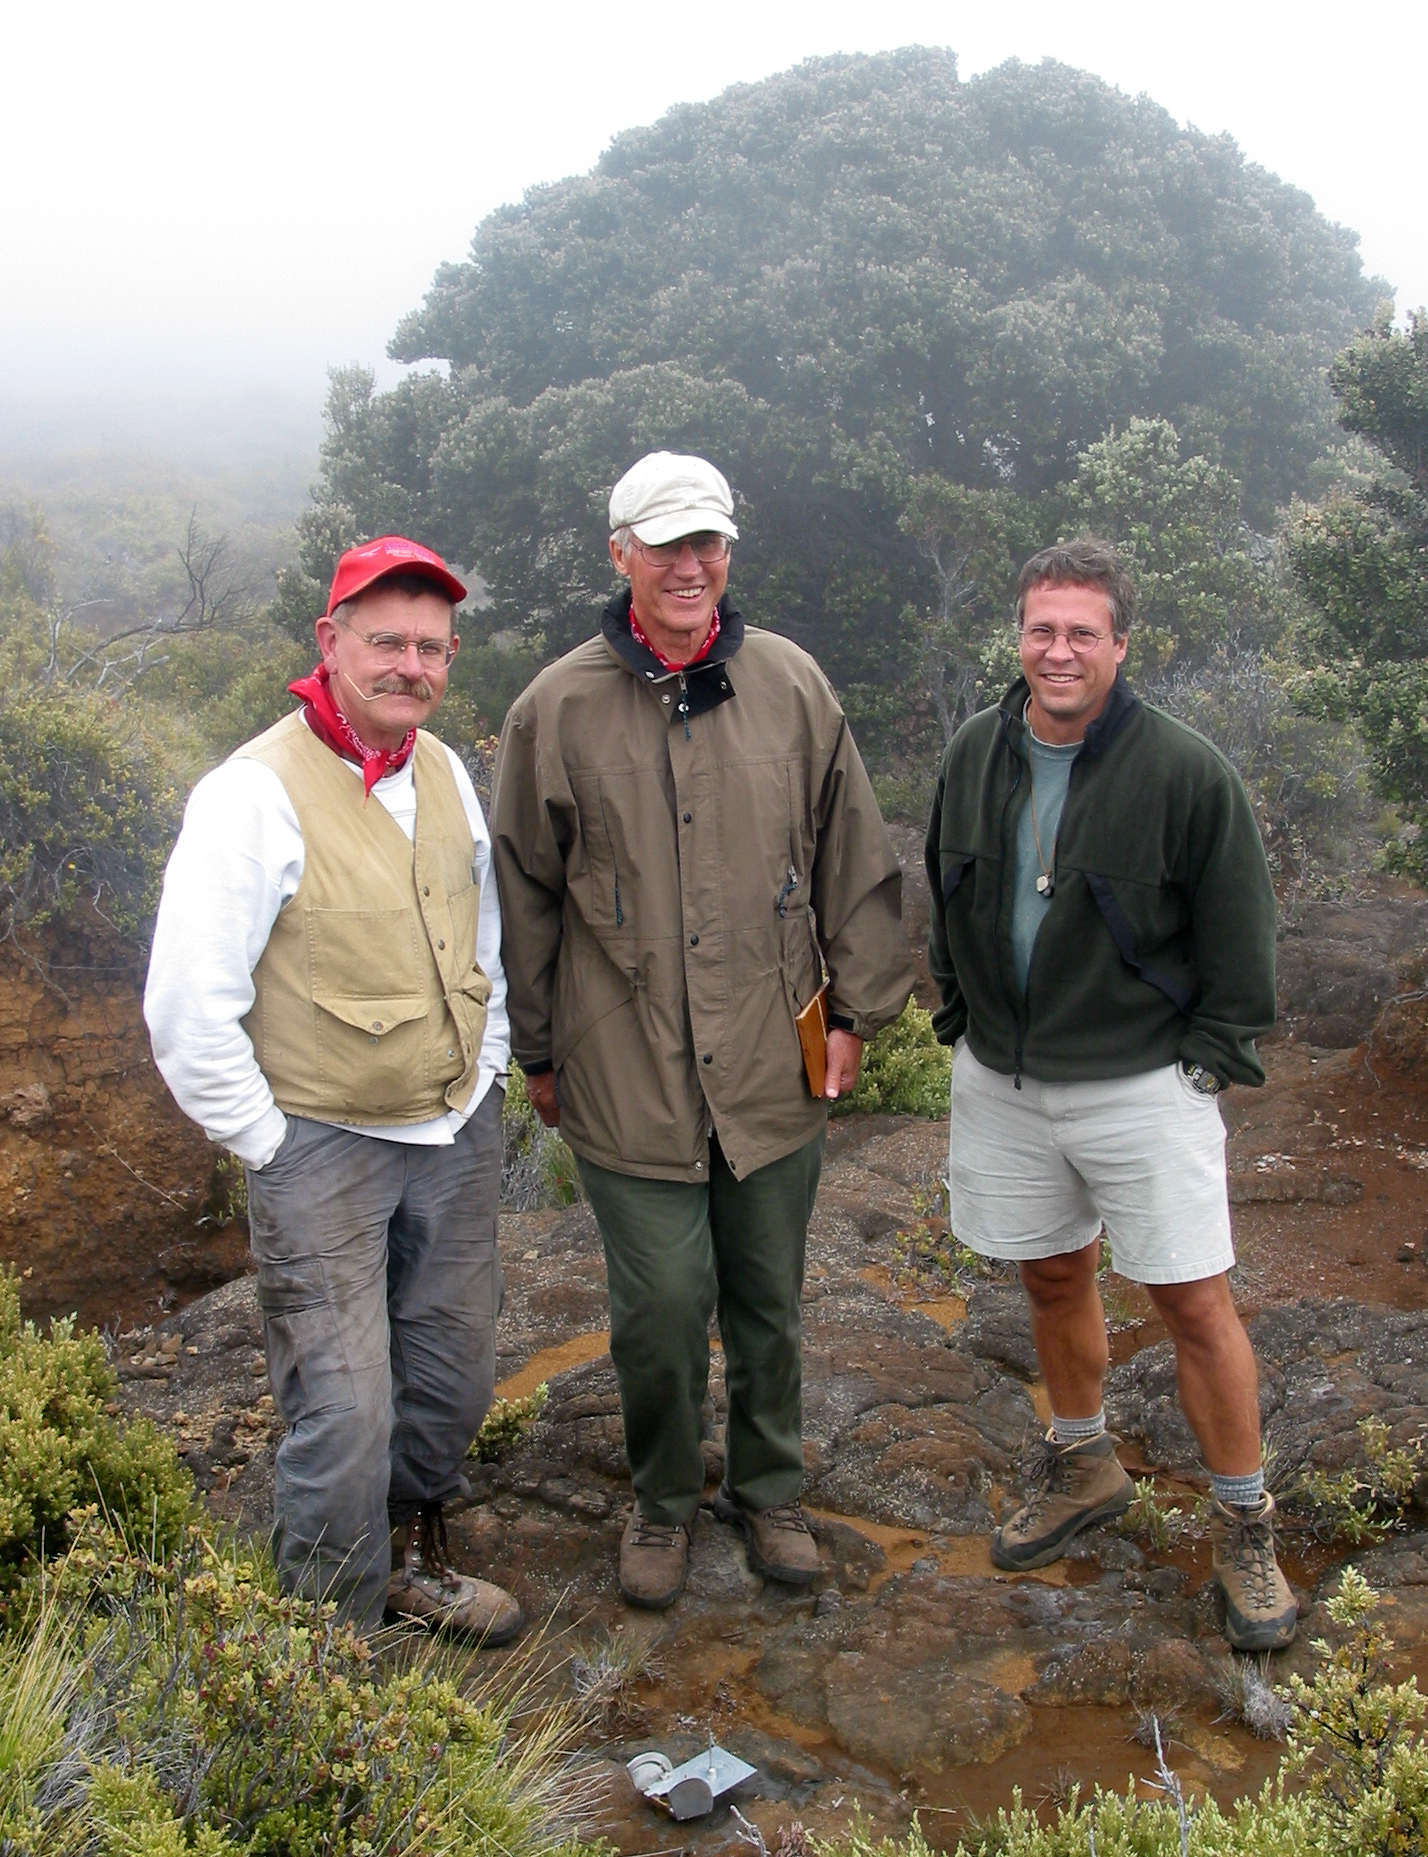 USGS scientist Duane Champion with two colleagues